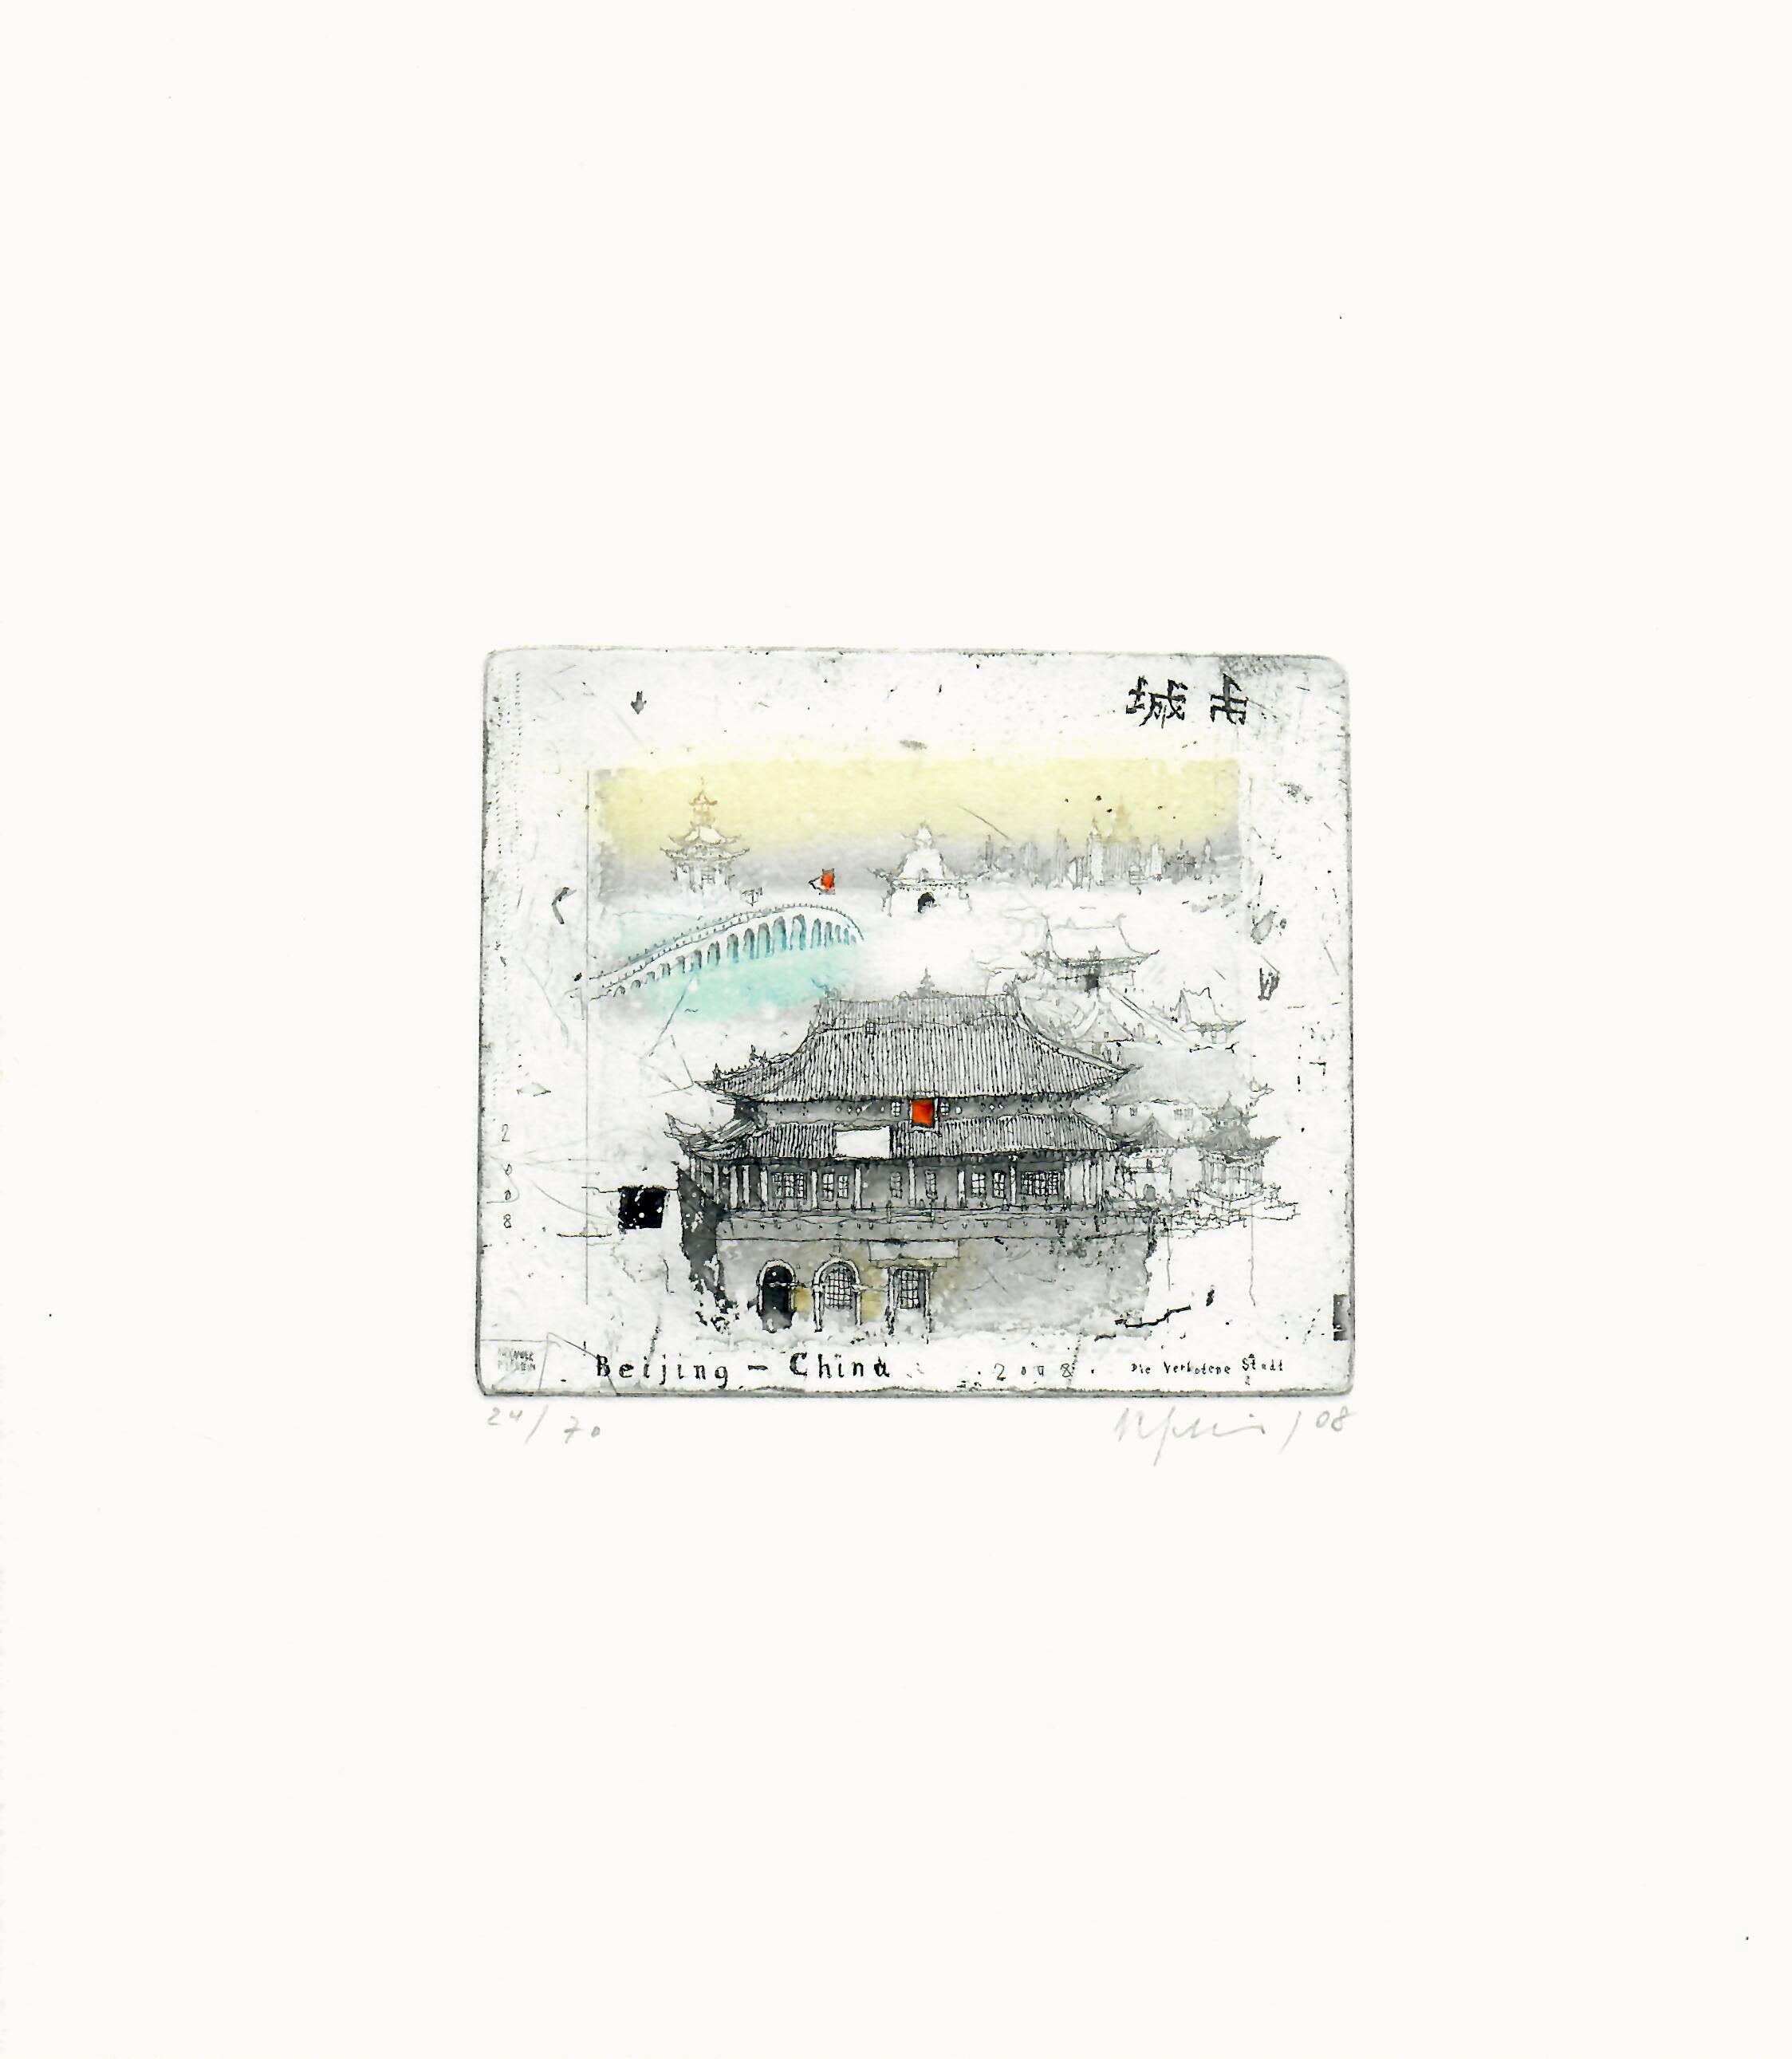 ''China, Forbidden City' by Alexander Befelein- beautiful contemporary limited edition print of the city architecture in Beijing, China. A graphic miniature etching has many layers of details - it's the best choice for small interiors. The print